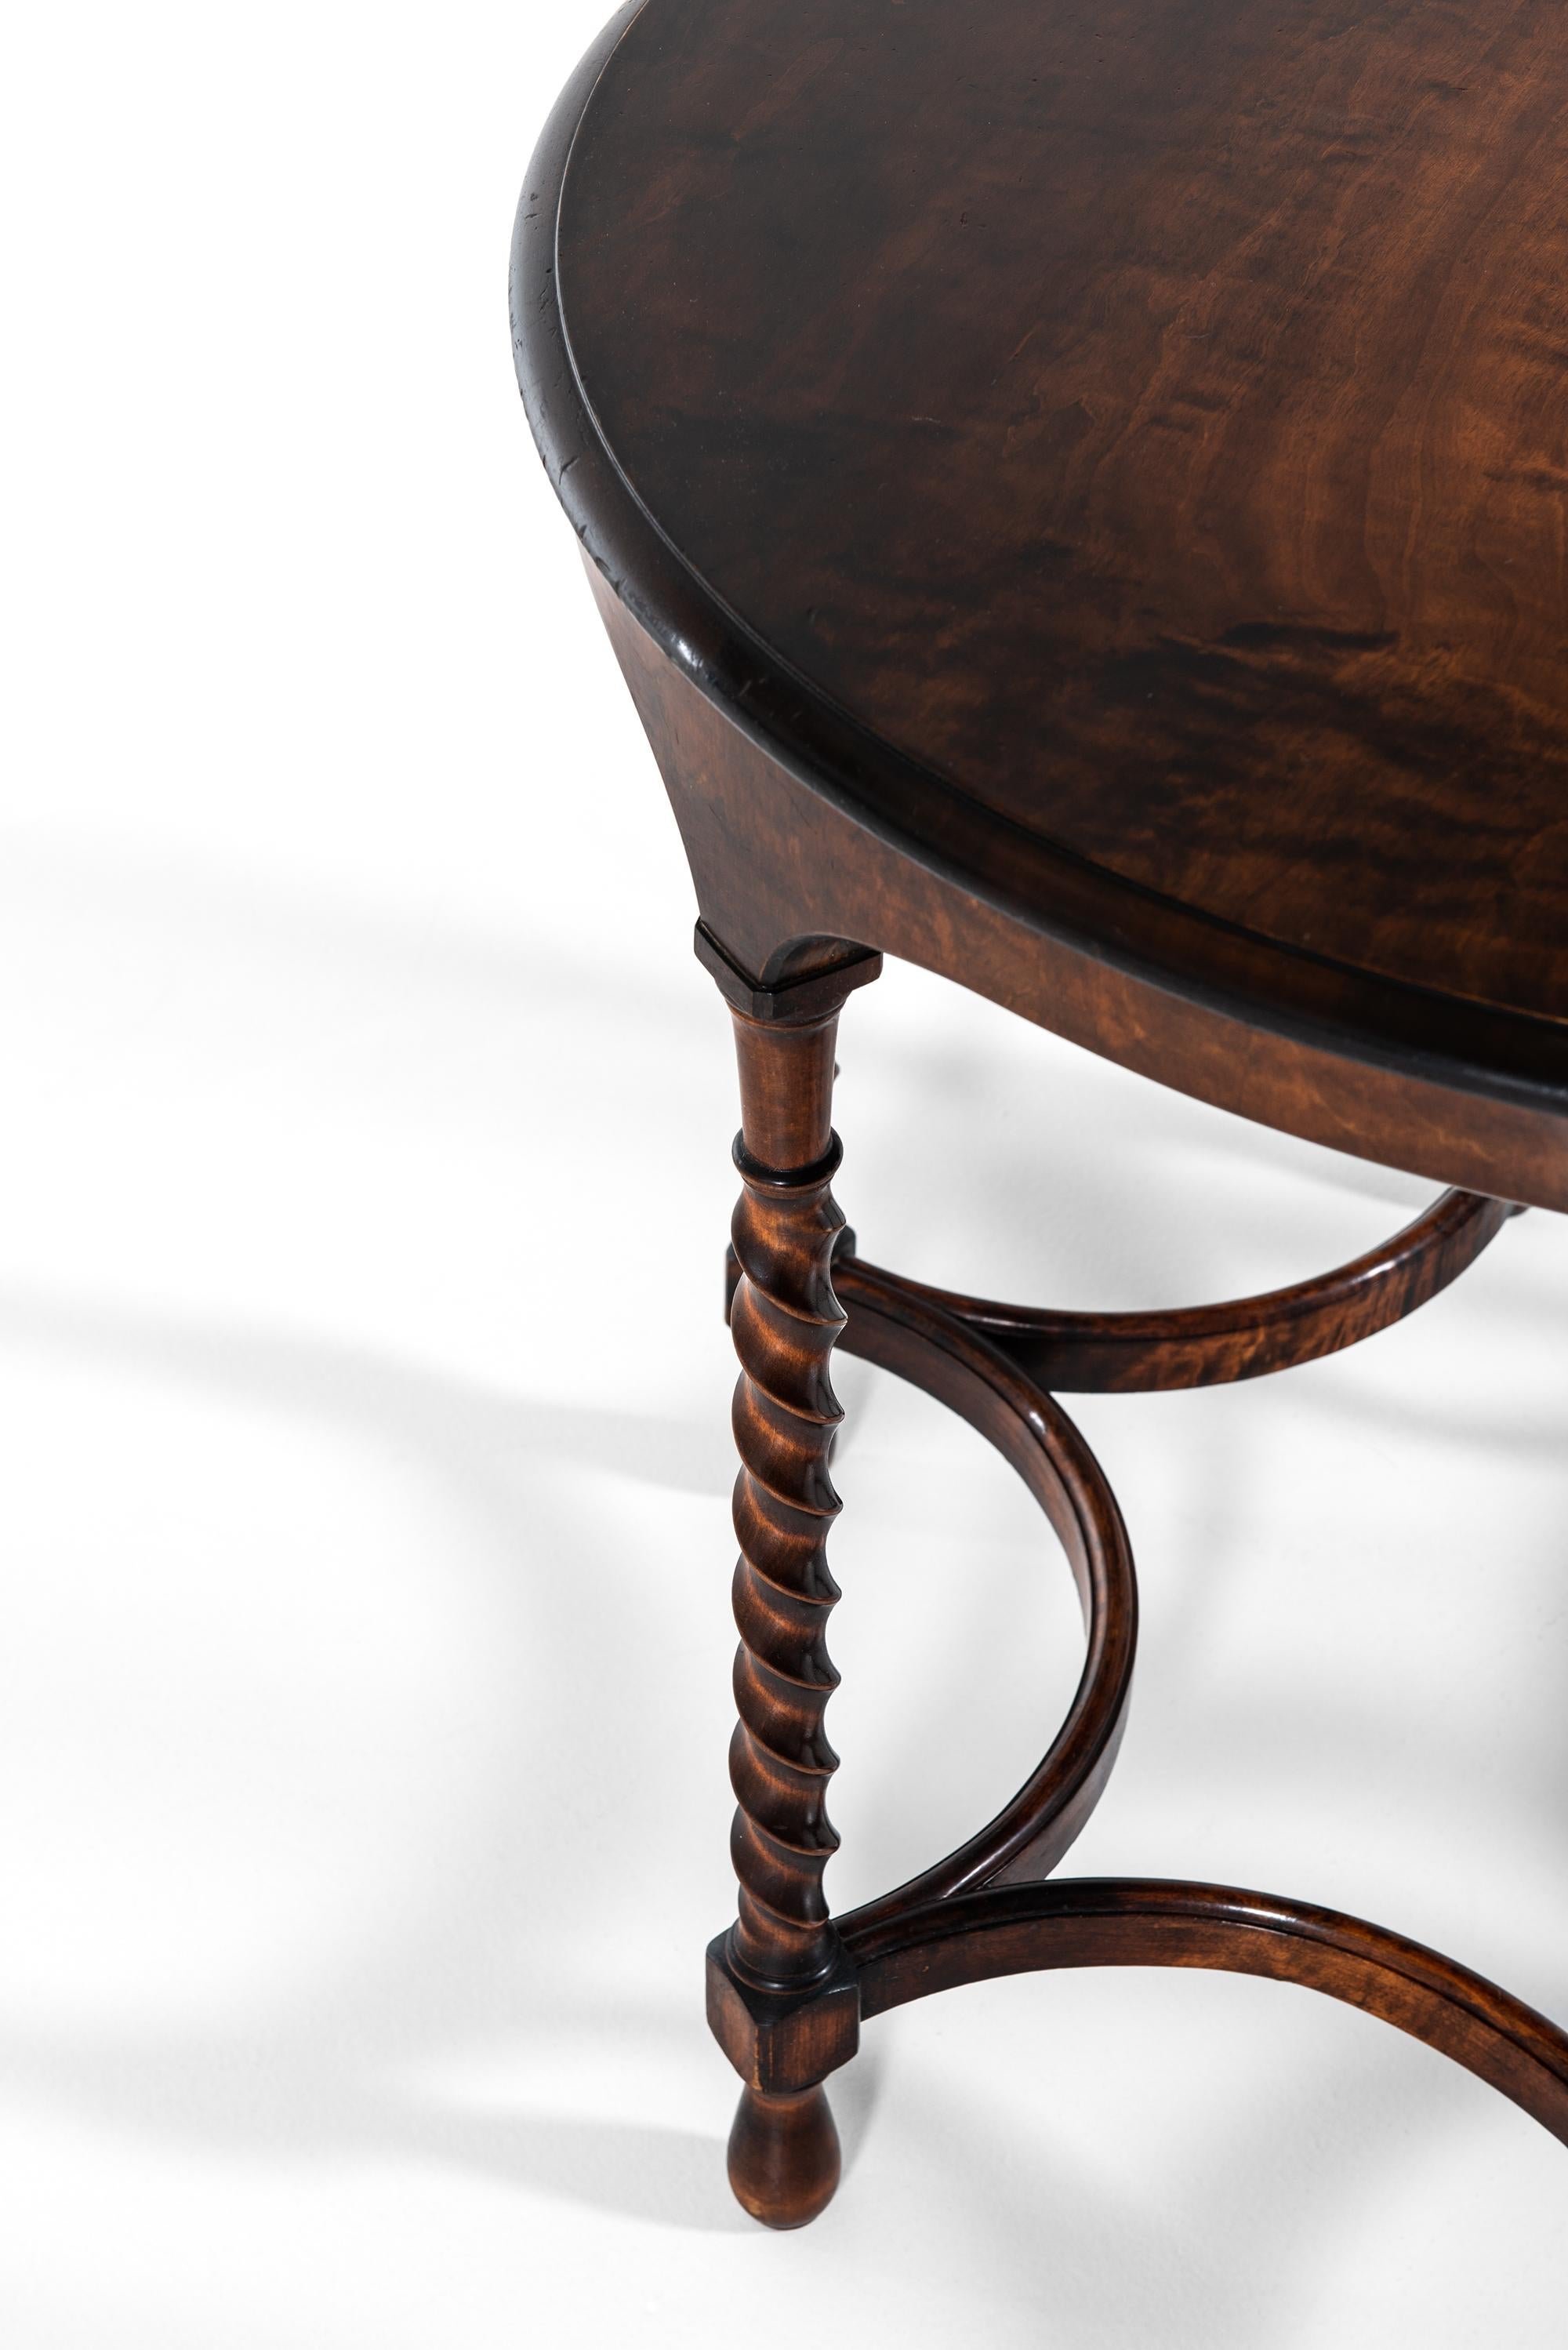 Center Table in Dark Stained Beech in the Manner of Axel Einar Hjorth In Good Condition In Limhamn, Skåne län